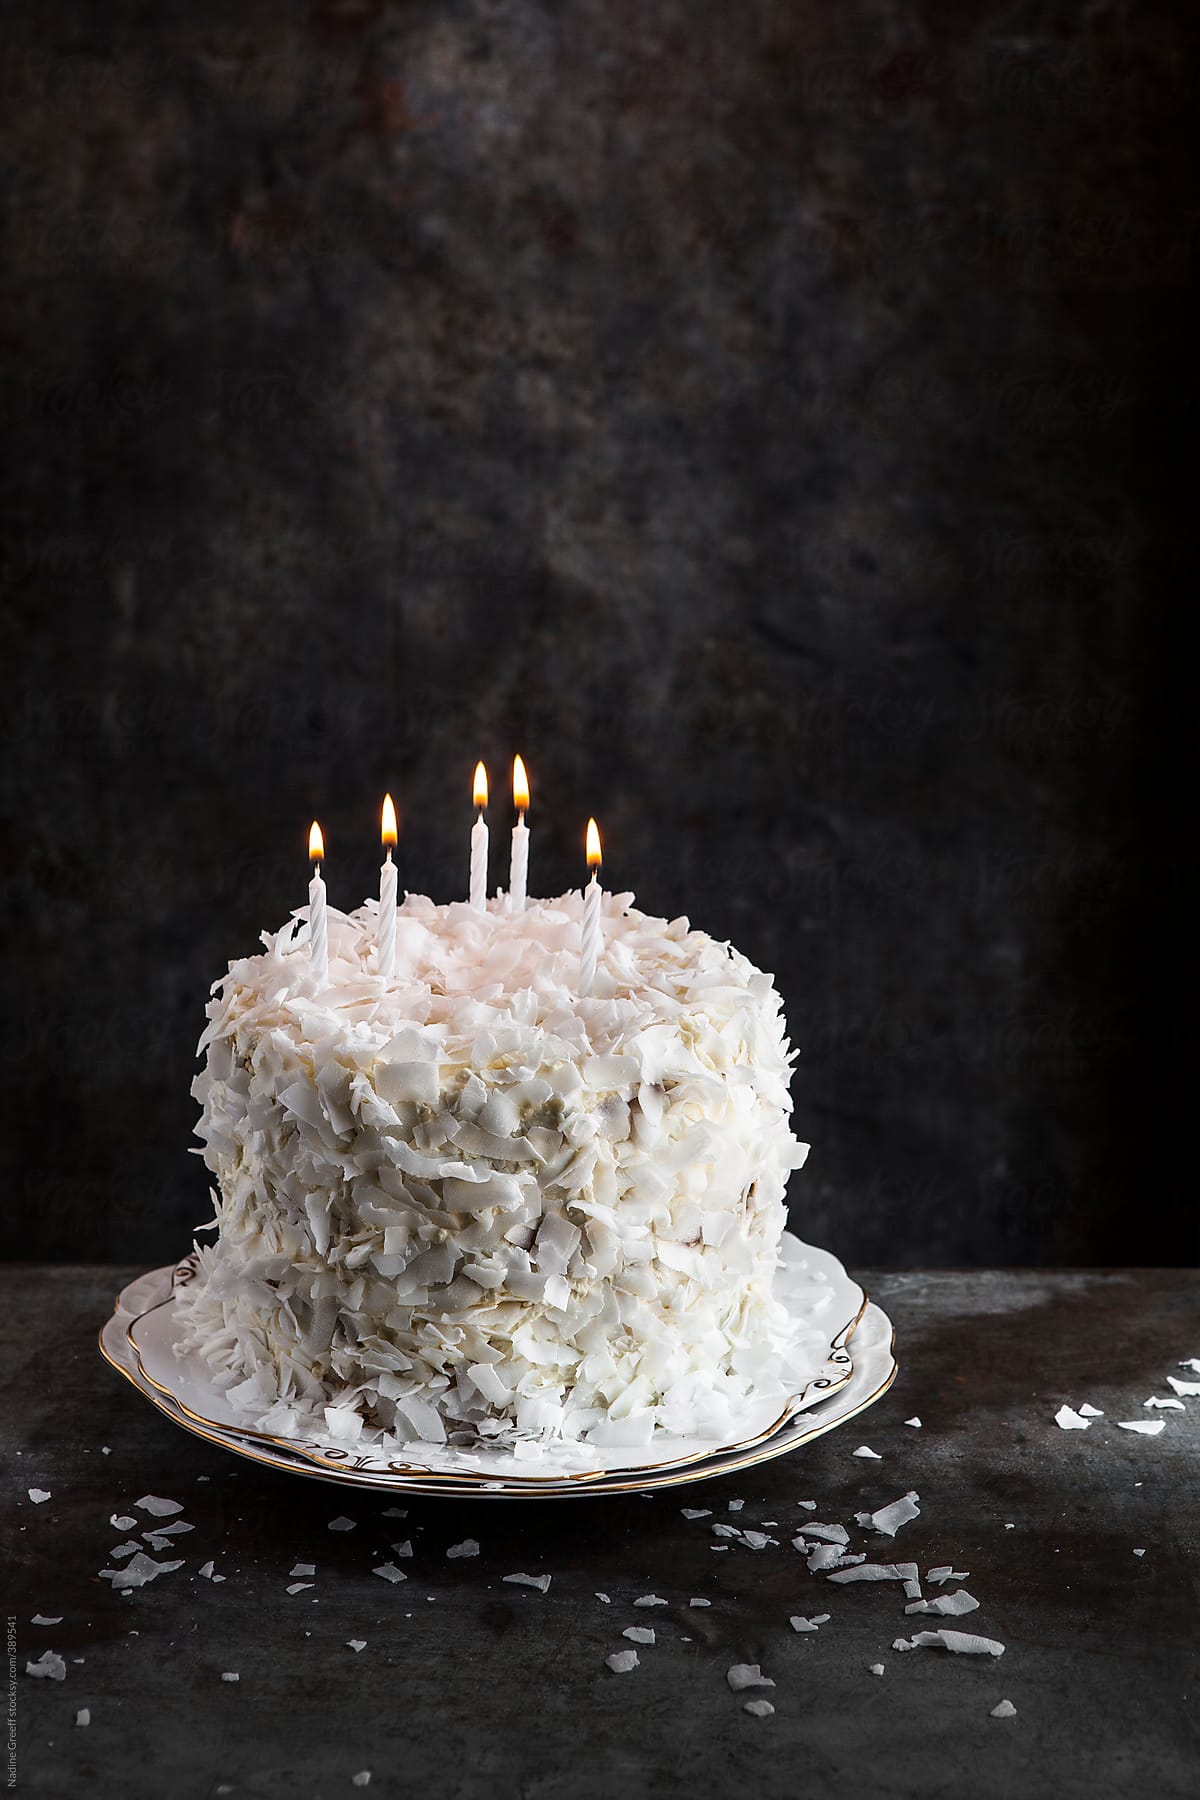 Coconut Flake Cake with candles